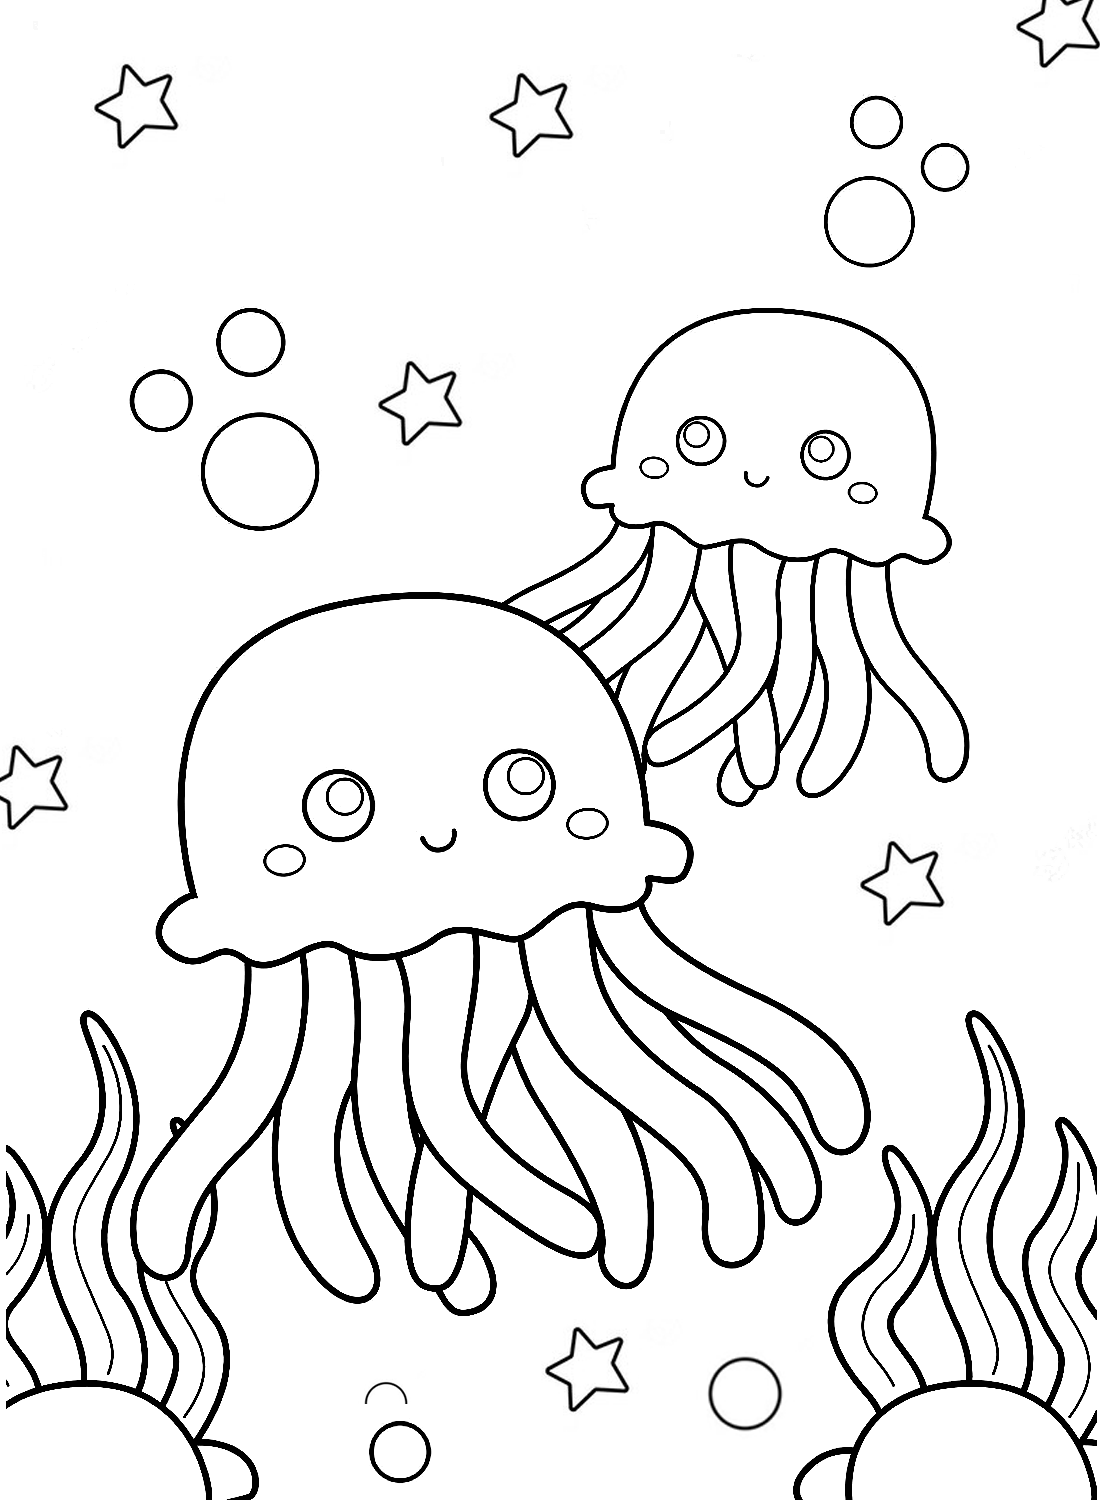 Many Jellyfishes Coloring Page